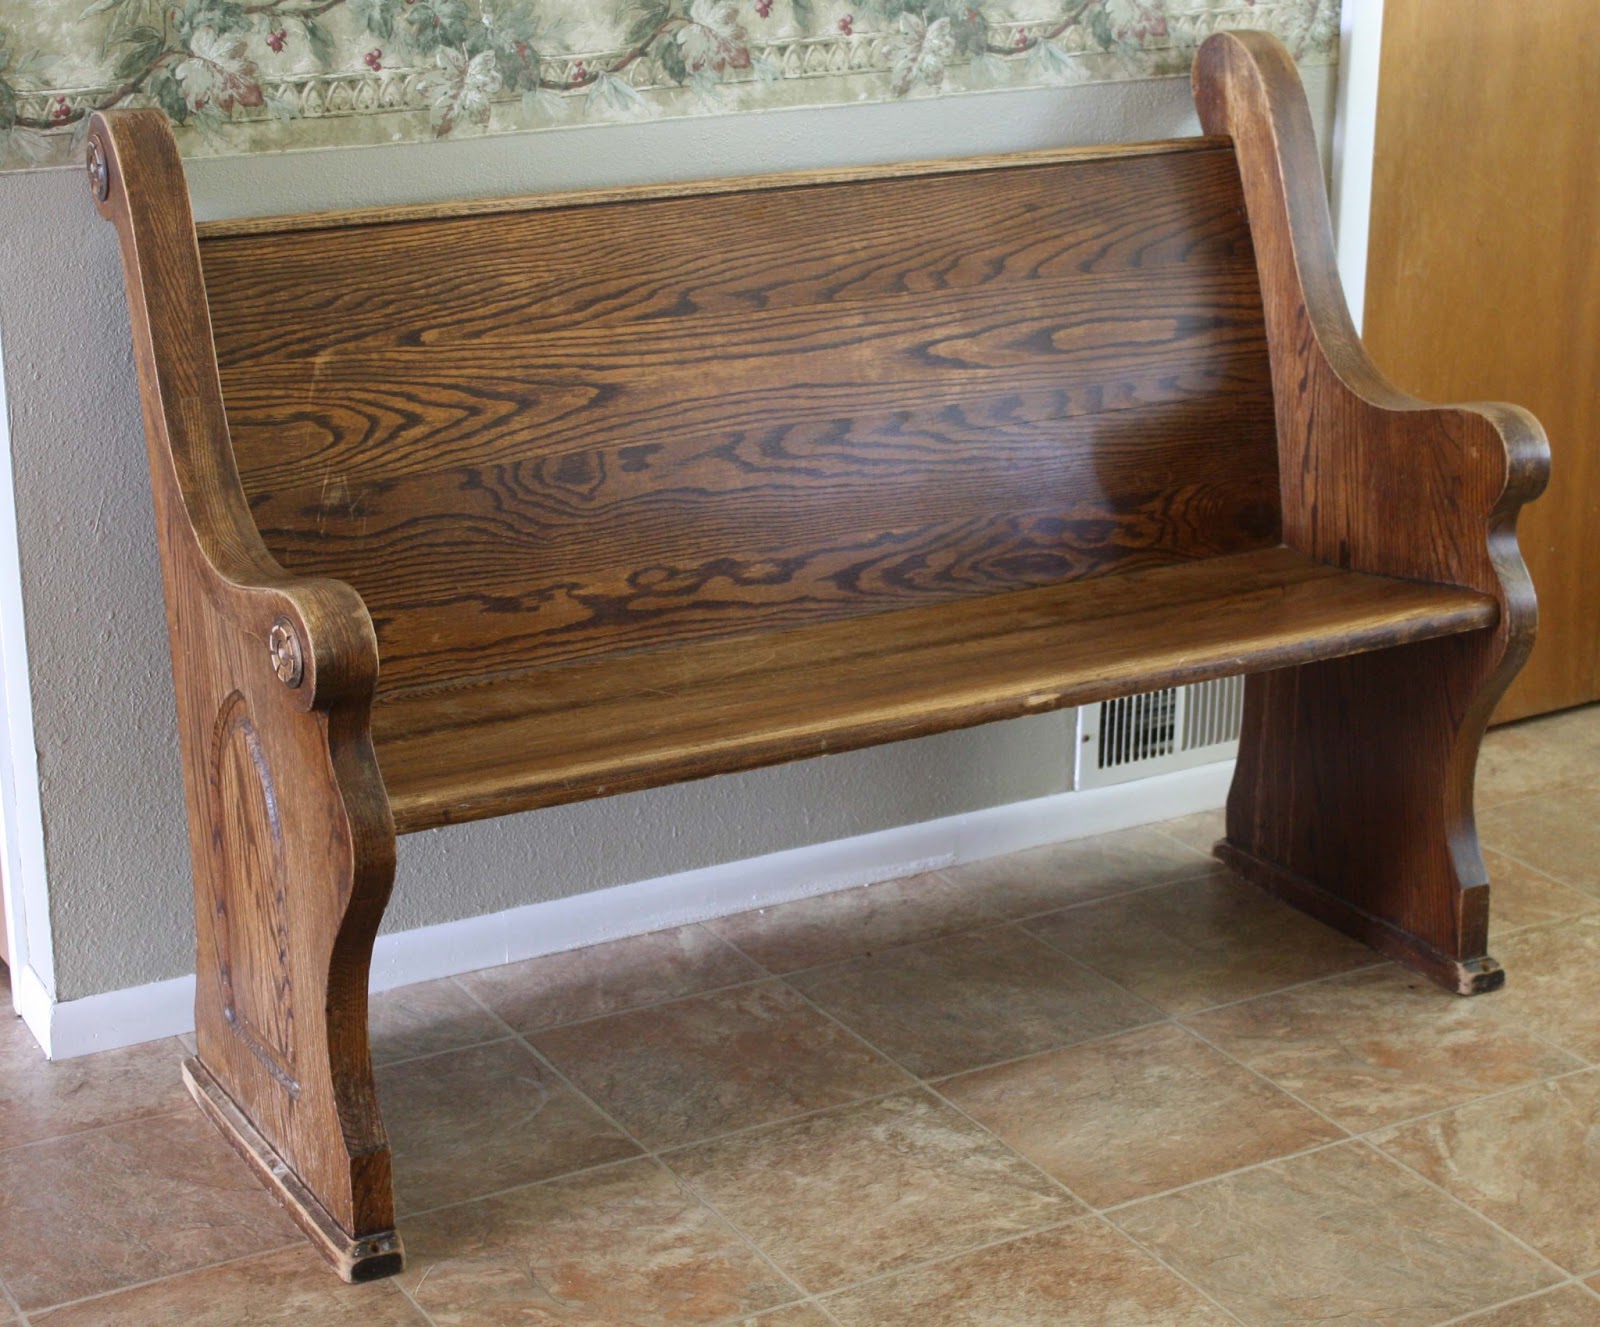 Running With Scissors: Church Pew to Mud Room Bench